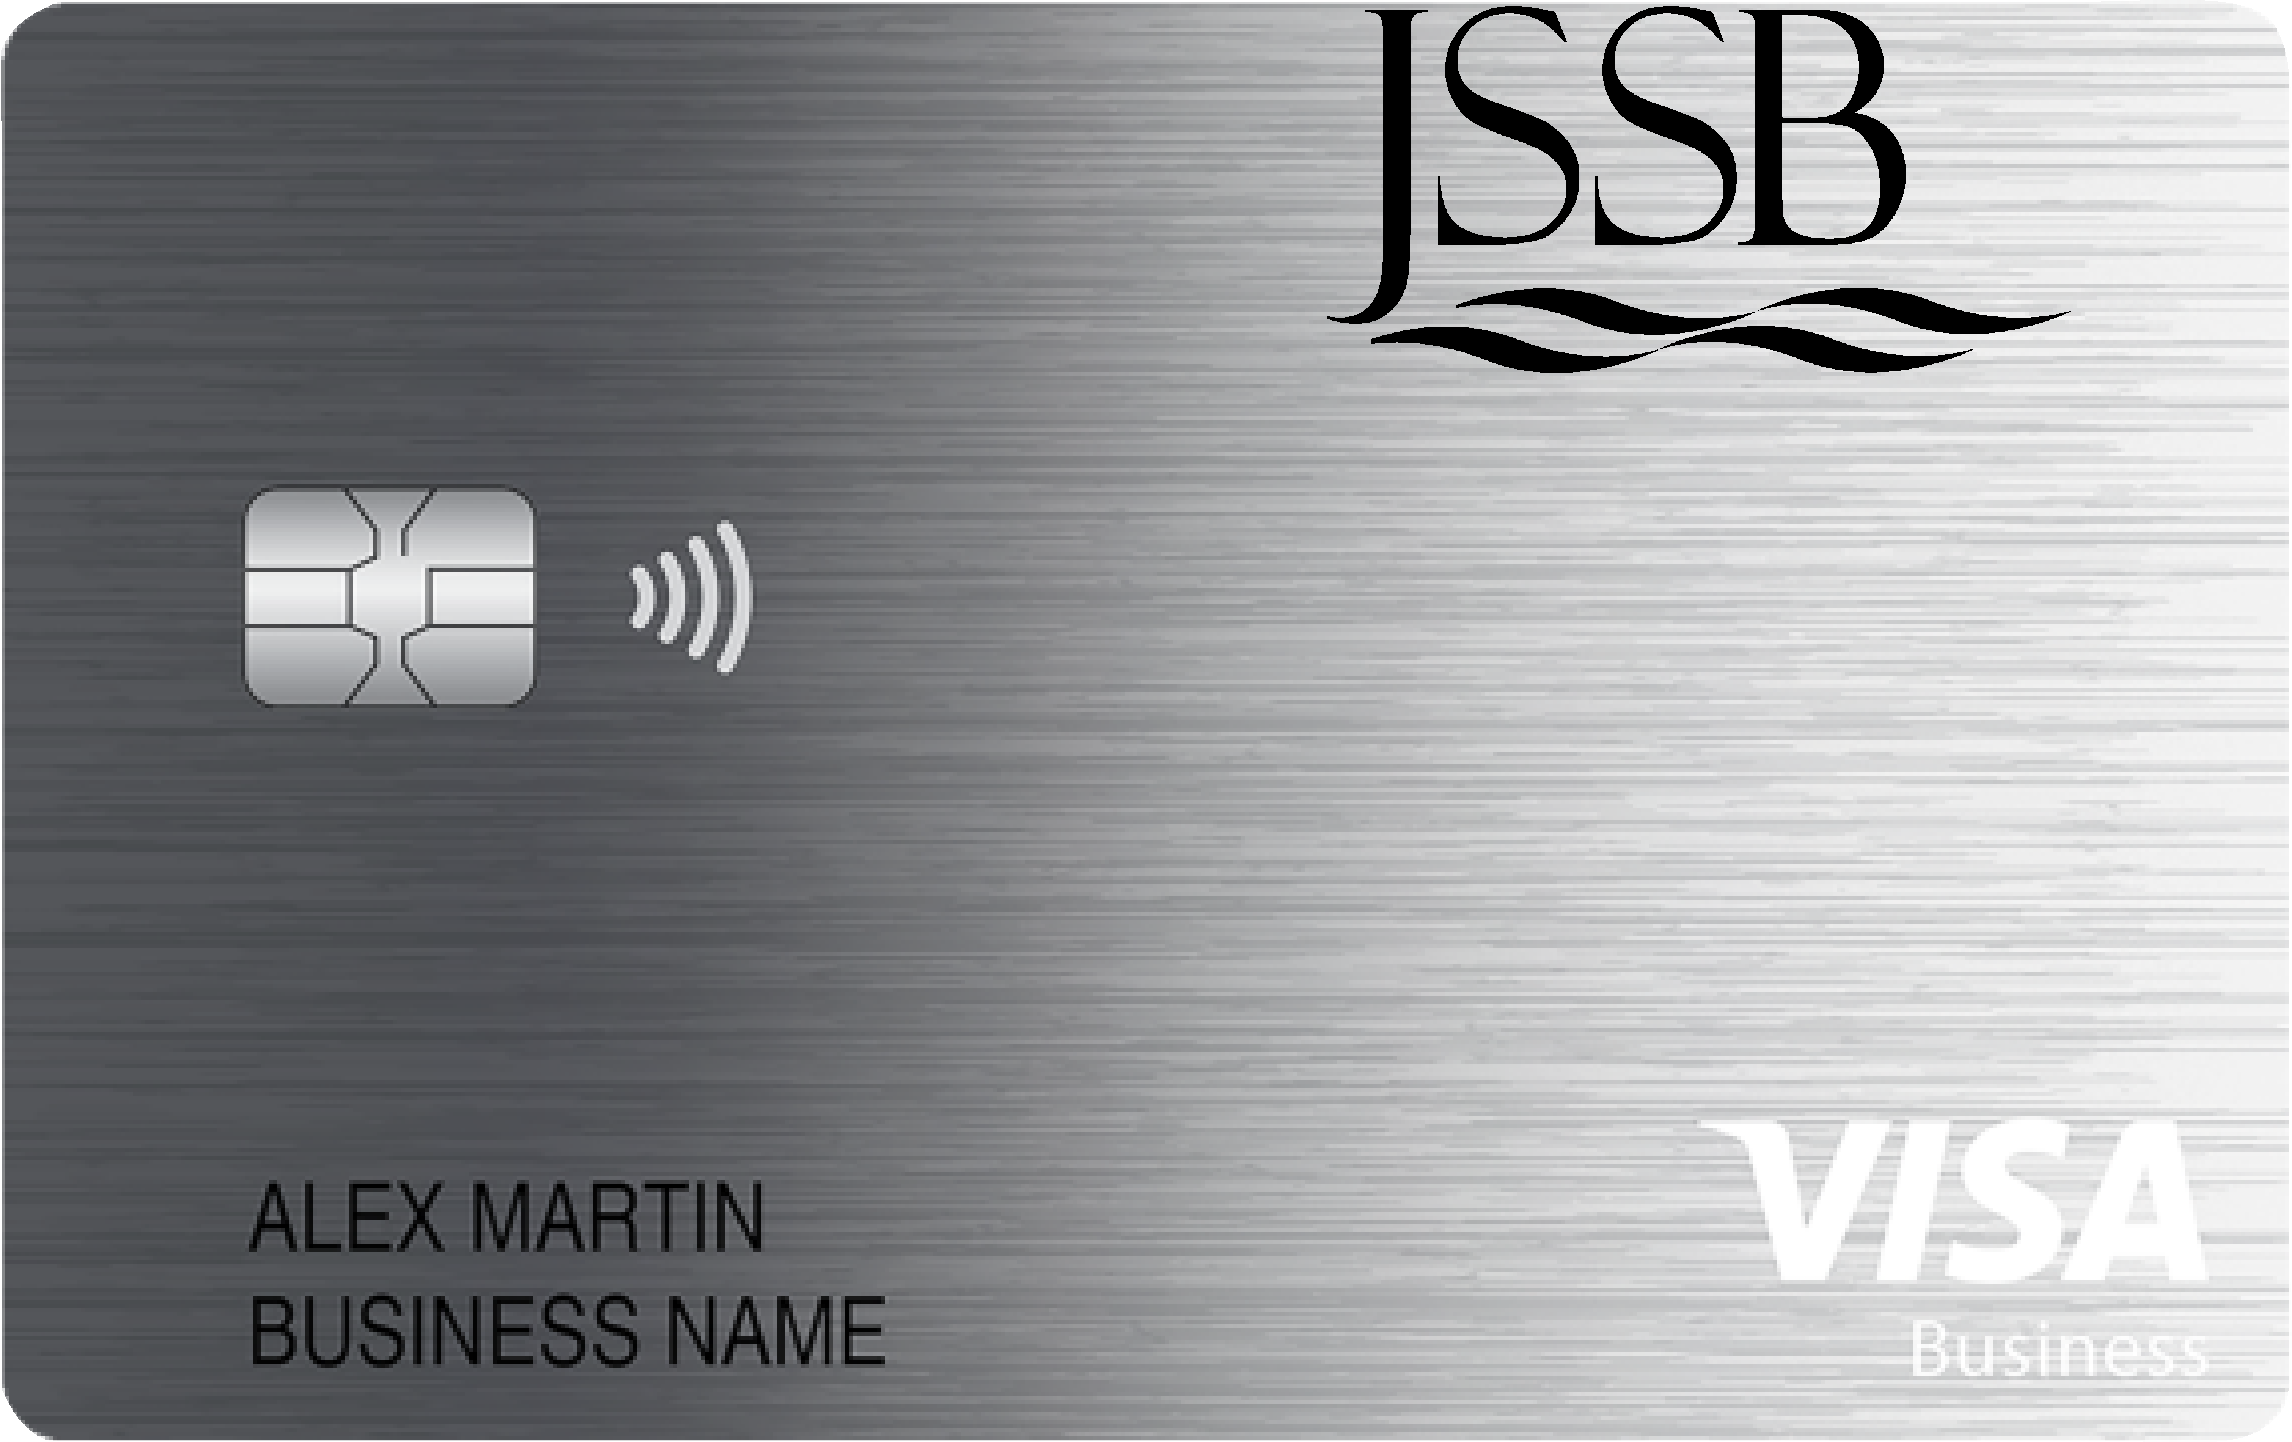 Jersey Shore State Bank Business Card Card